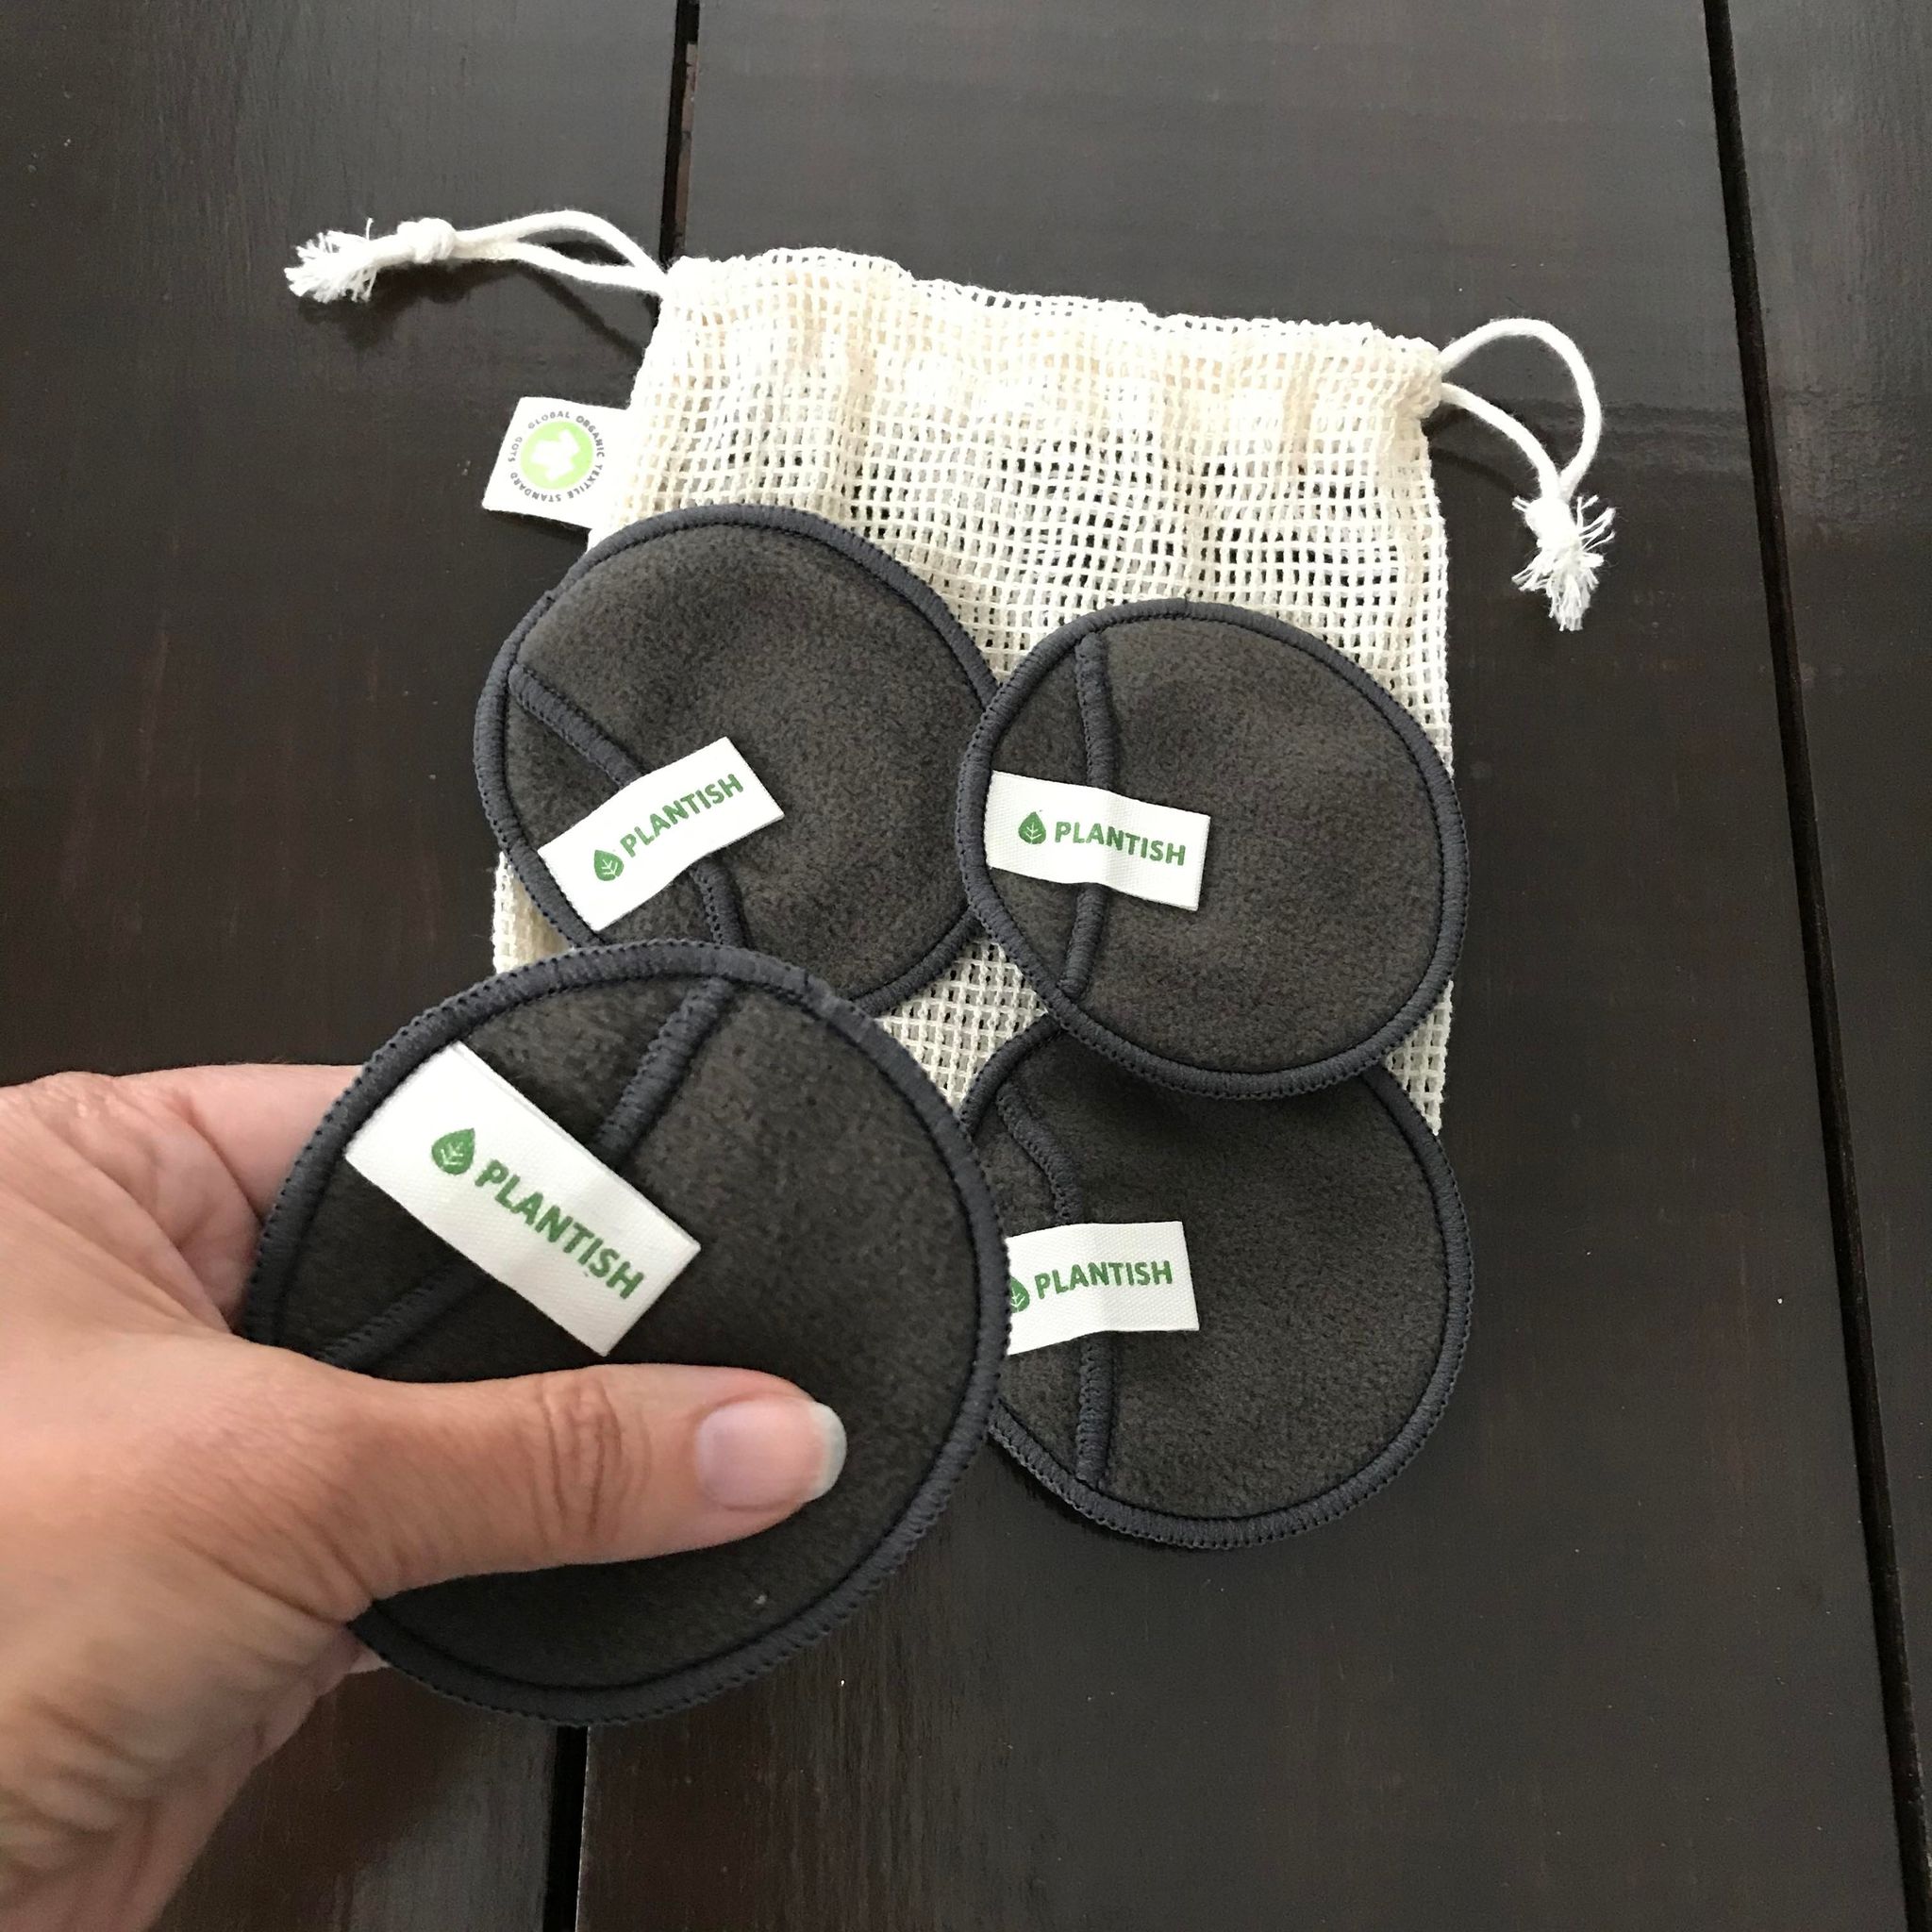 Bamboo Charcoal Pads